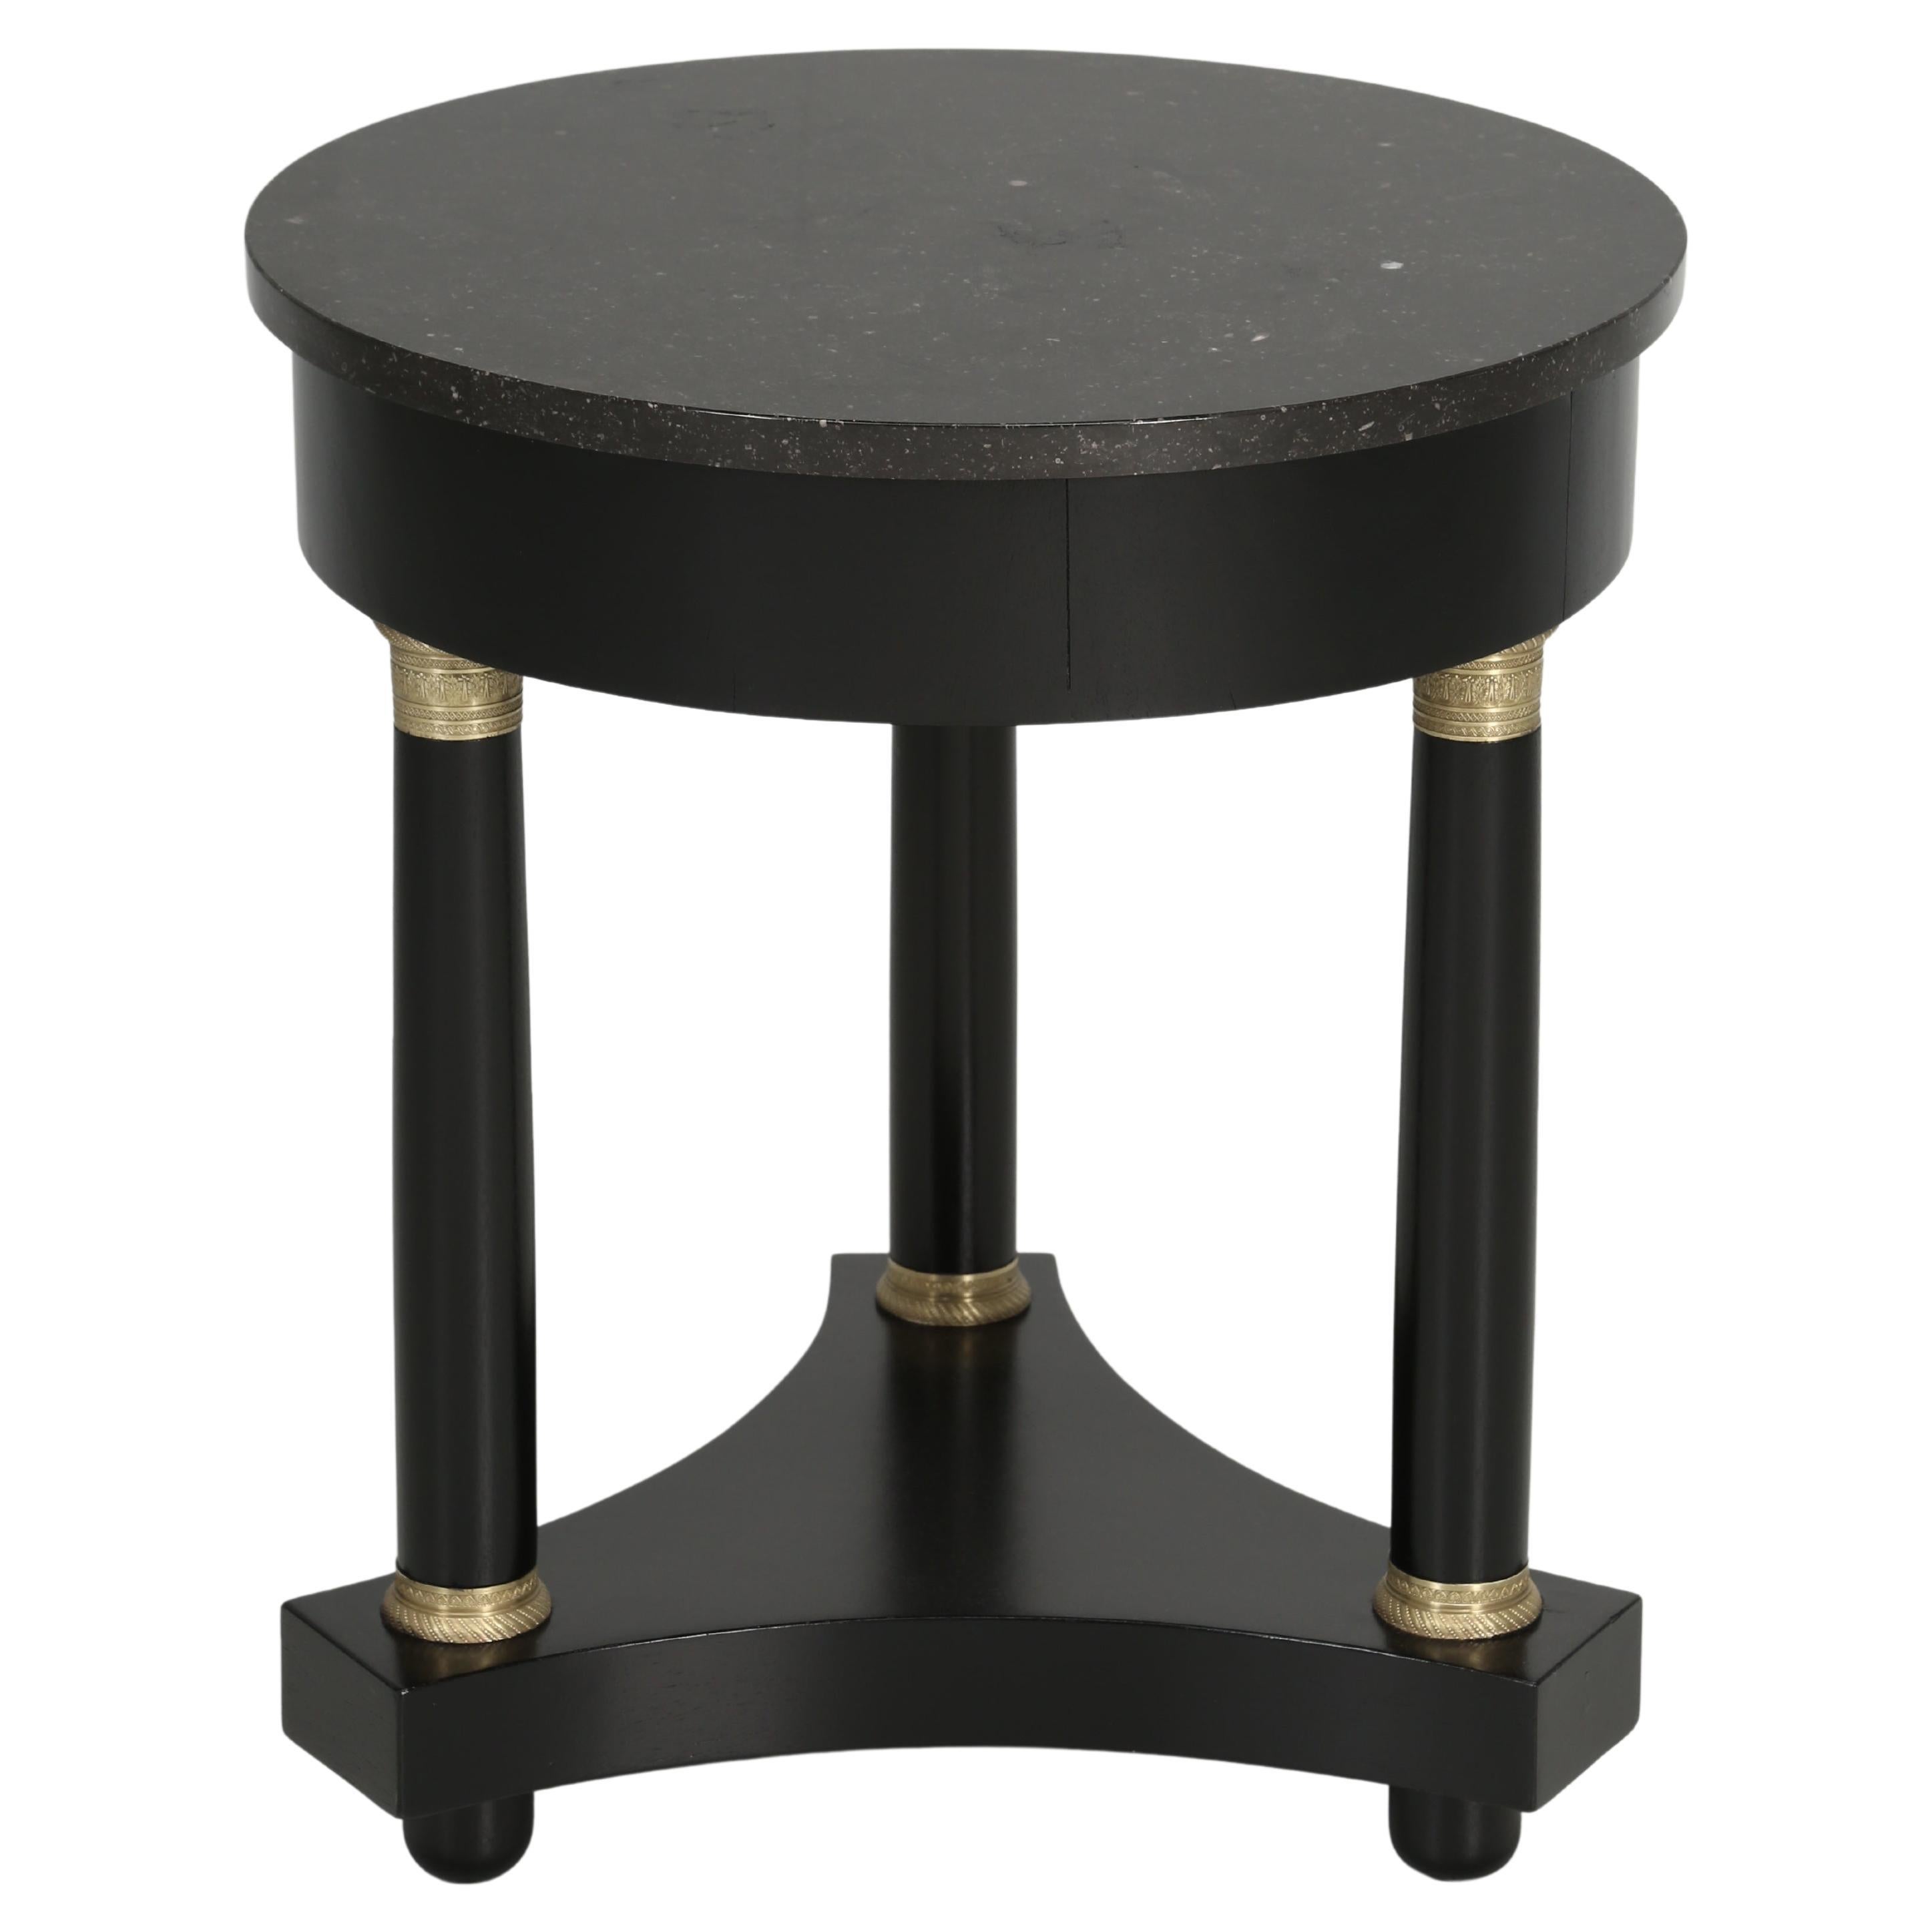 French Empire Style Ebonized Side Table or End Table with Marble Top, Restored